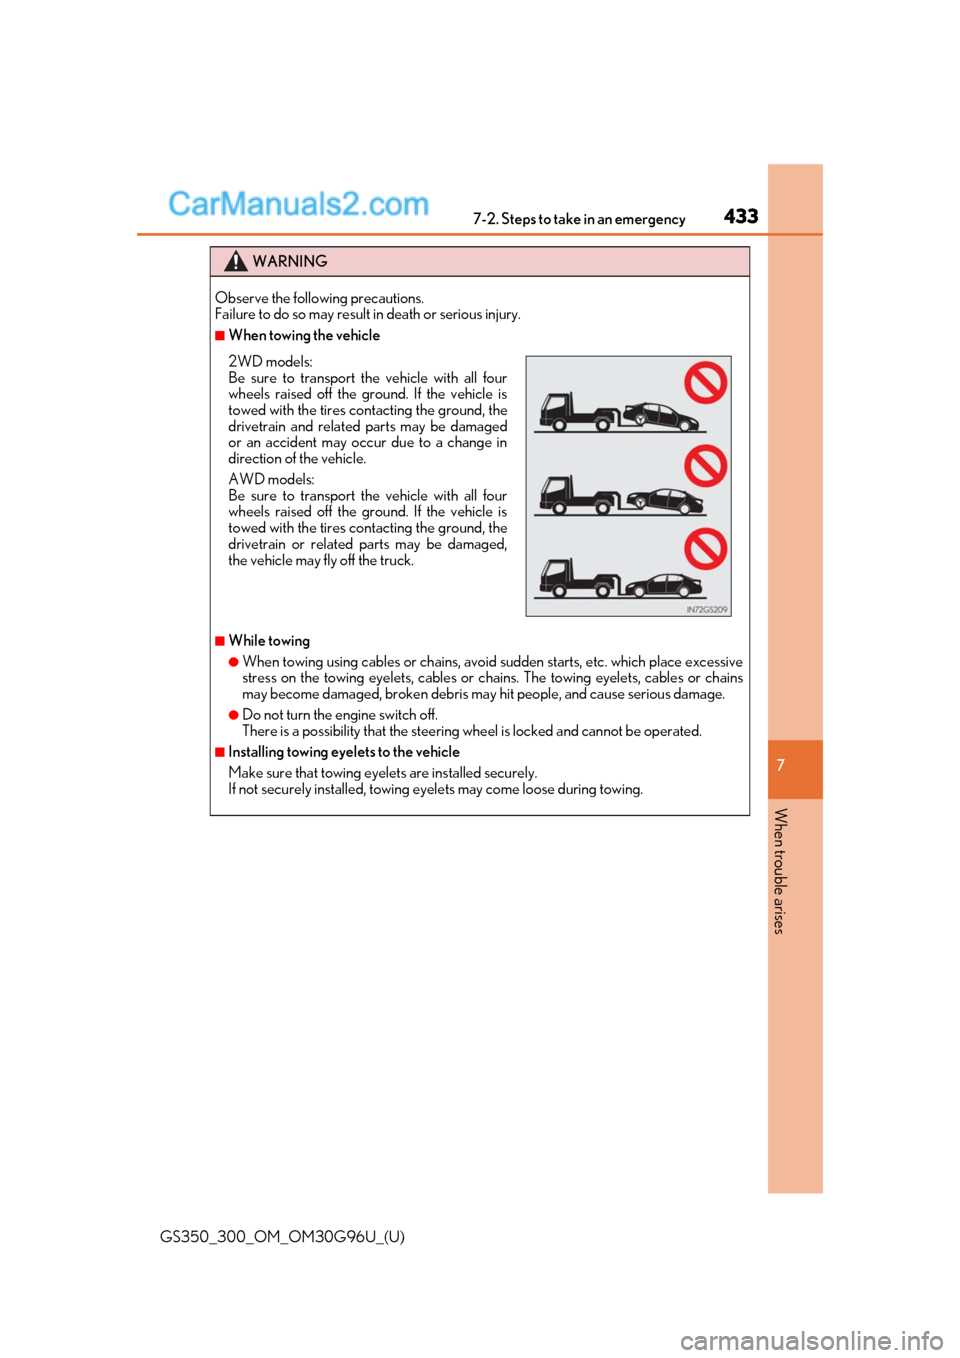 Lexus GS300 2019  Owners Manual 4337-2. Steps to take in an emergency
GS350_300_OM_OM30G96U_(U)
7
When trouble arises
WARNING
Observe the following precautions. 
Failure to do so may result in death or serious injury.
■When towing